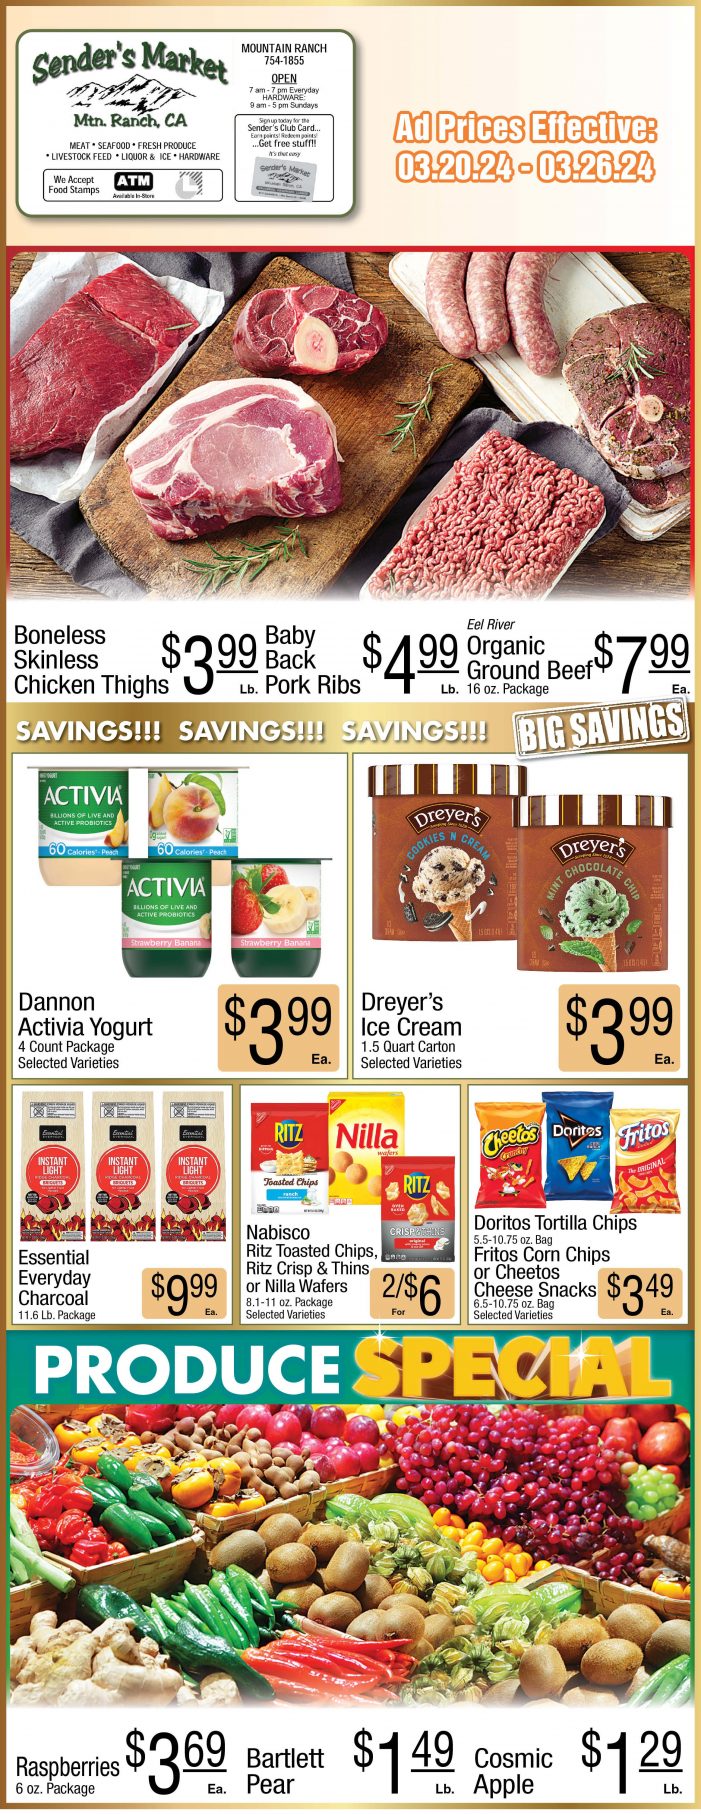 Sender’s Market Weekly Ad & Grocery Specials Through March 26th! Shop Local & Save!!